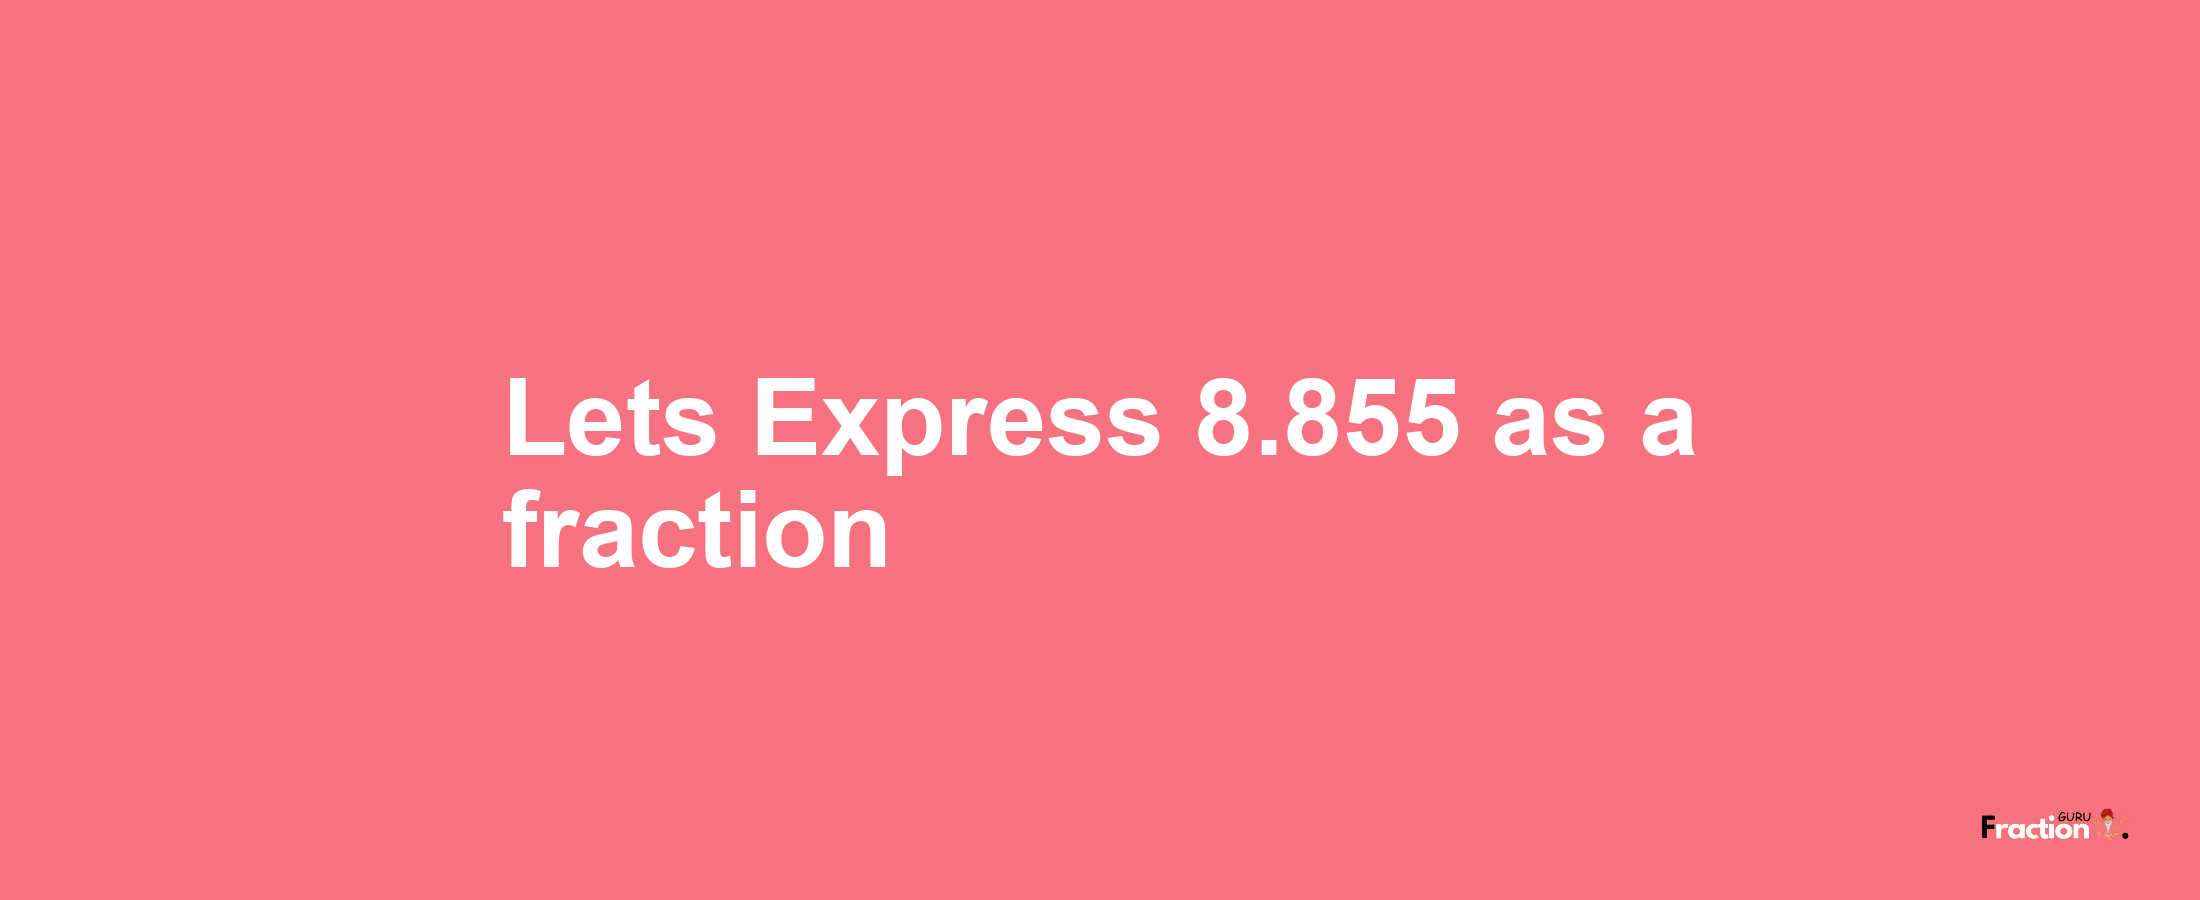 Lets Express 8.855 as afraction